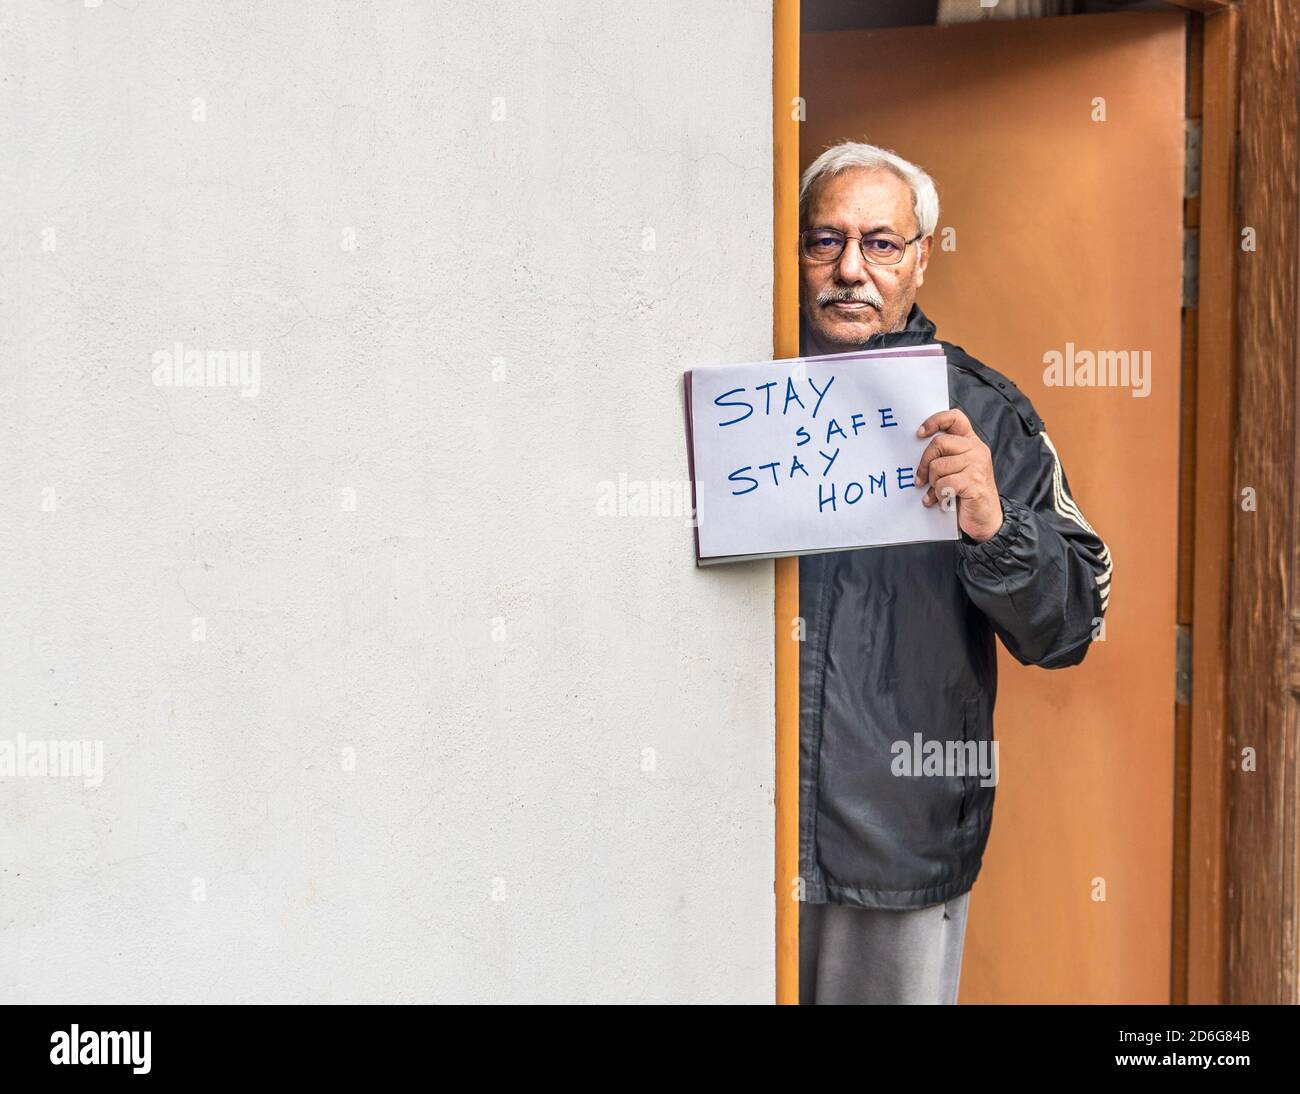 Covid19 pandemic lock down in lucknow,India, a senior citizen braving home quarantine appealing to Stay safe,Stay Home on 12-May,2020. Stock Photo